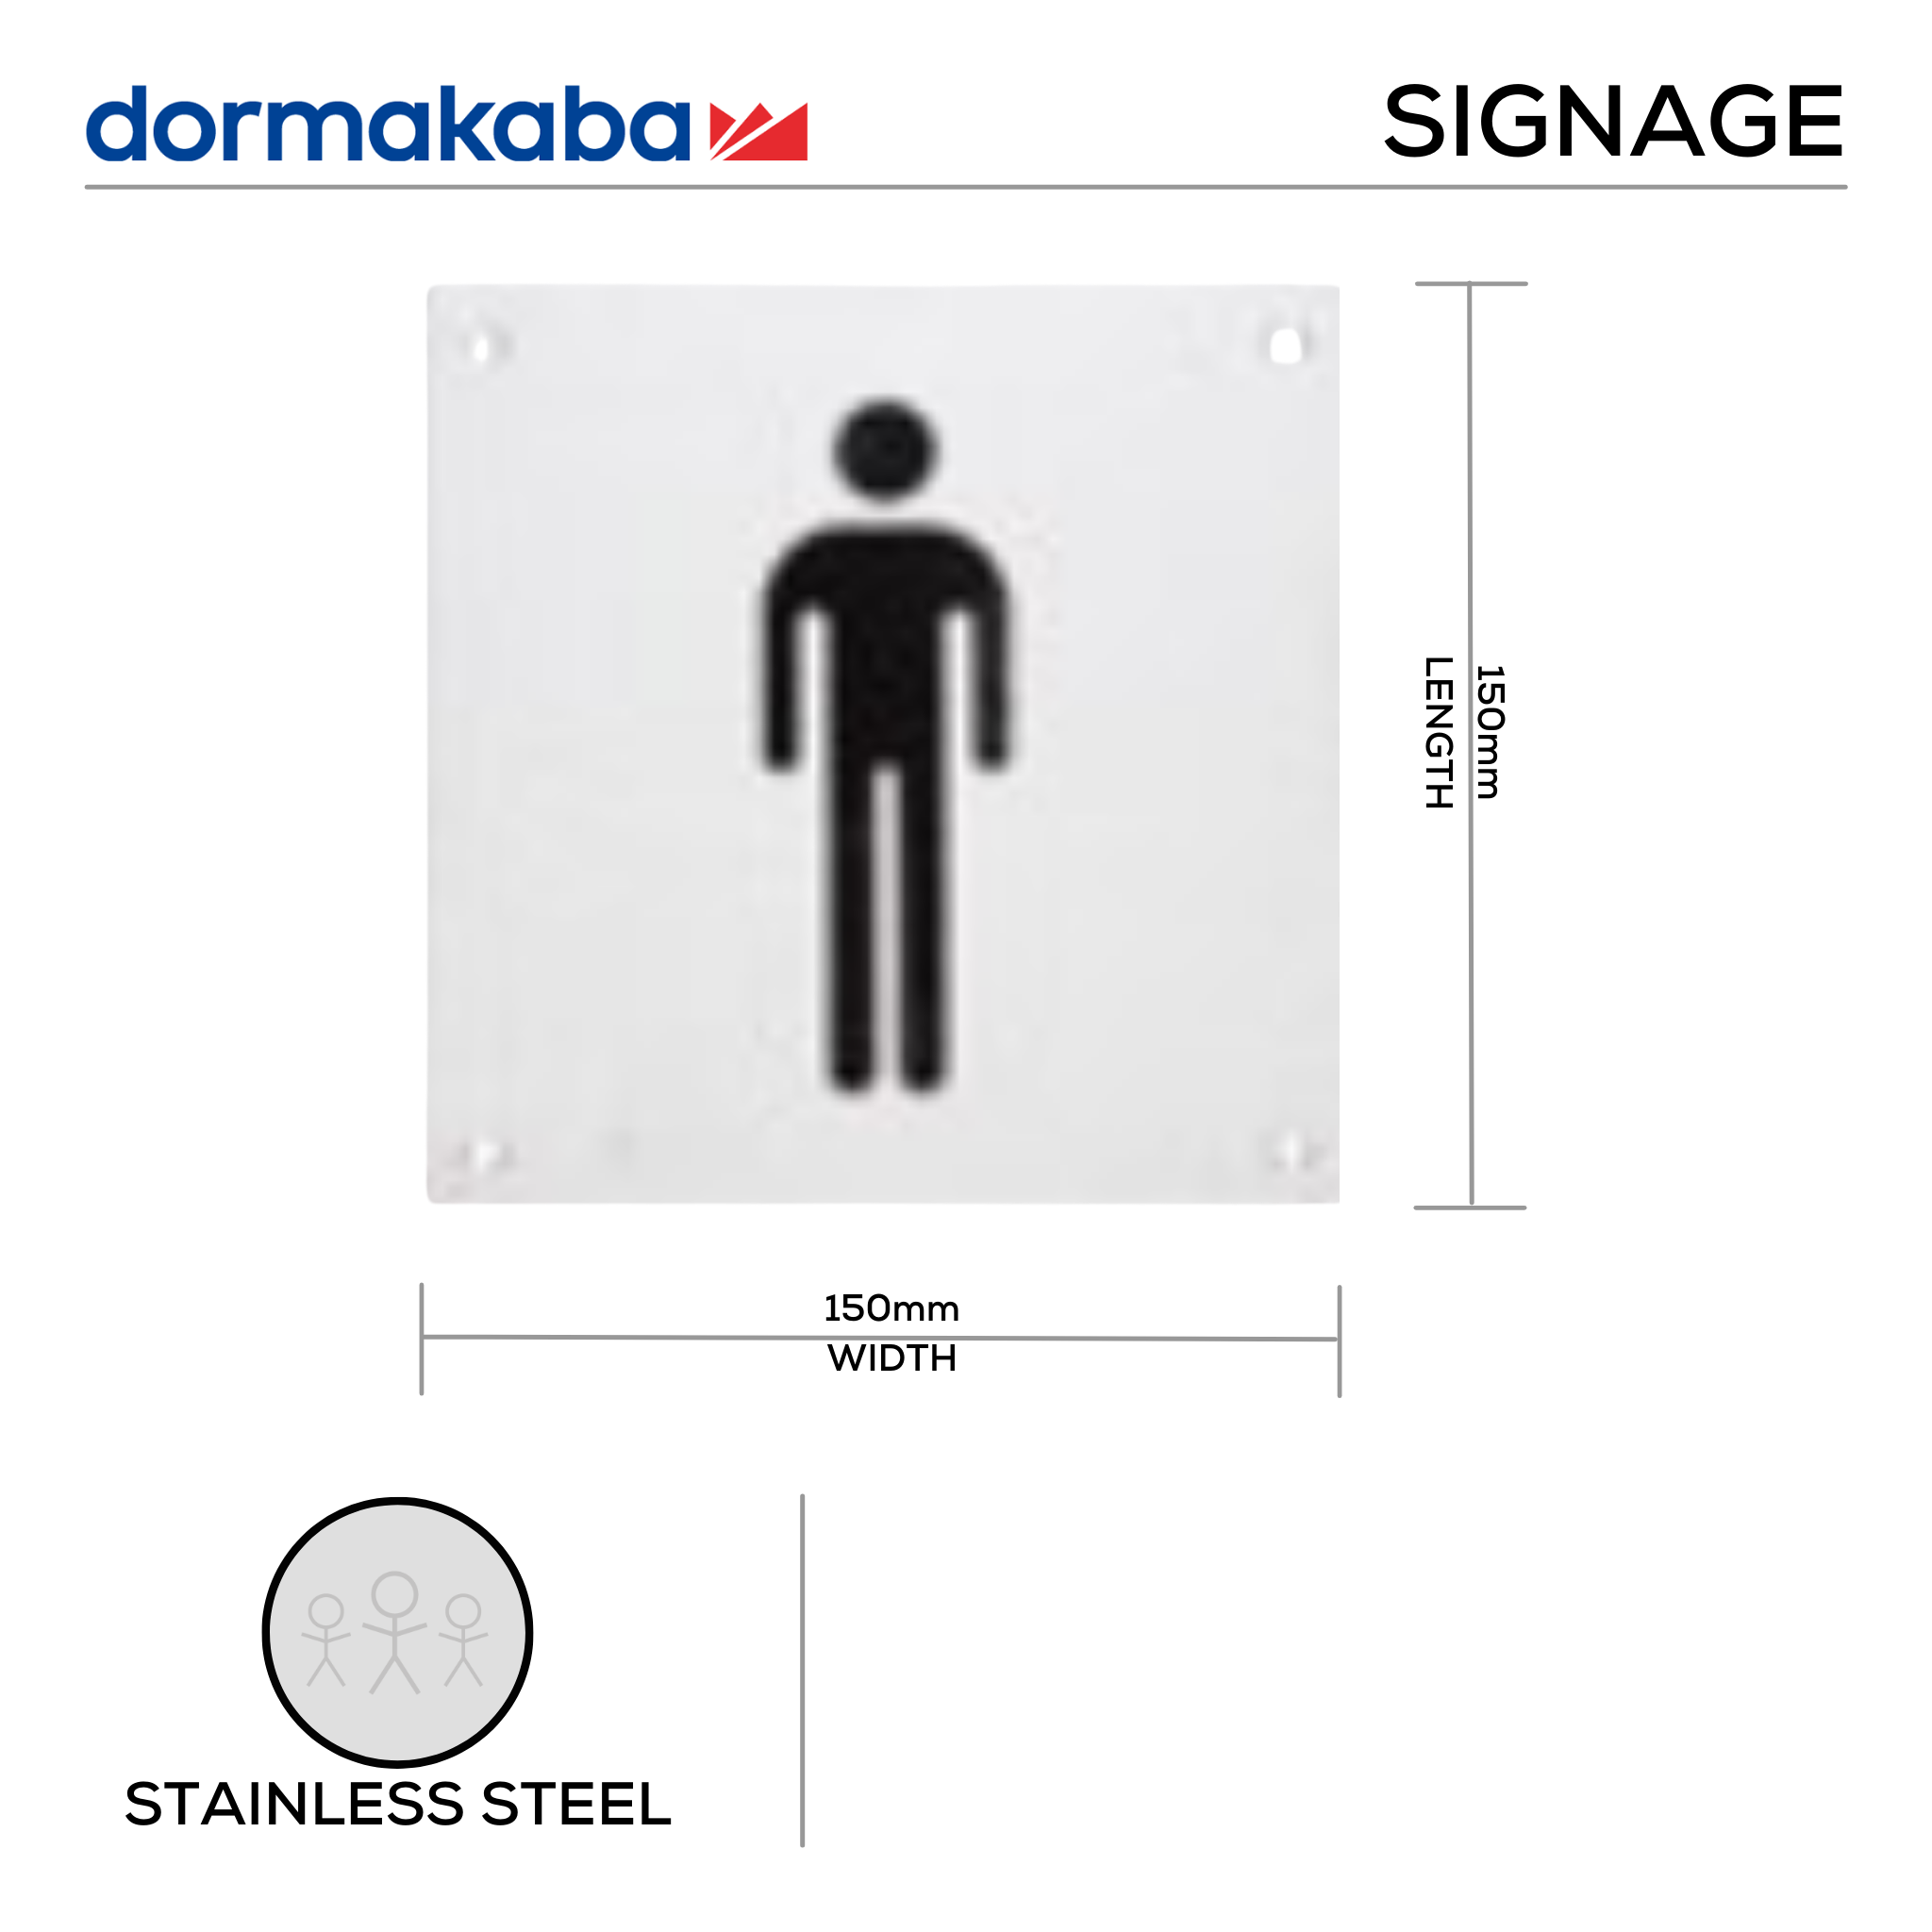 DSS-130, Door Signage, Male sign, 150mm (l), 150mm (w), 1,2mm (t), Stainless Steel, DORMAKABA